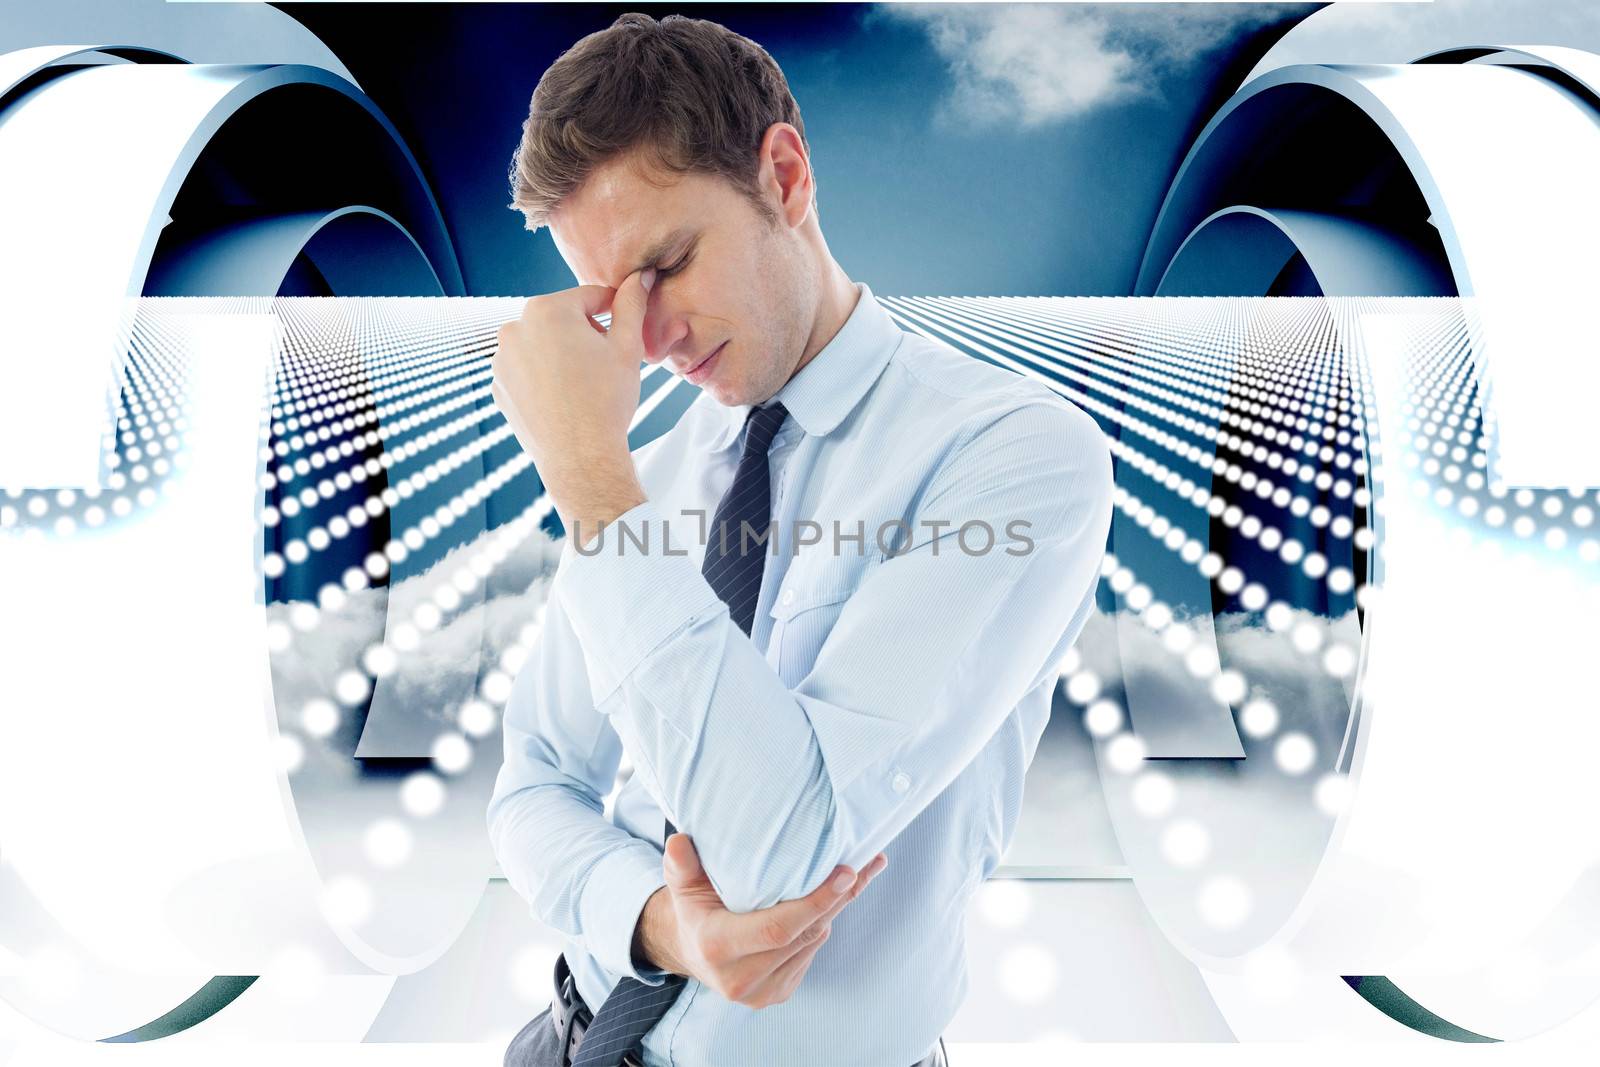 Businessman with a headache against abstract design in blue and white